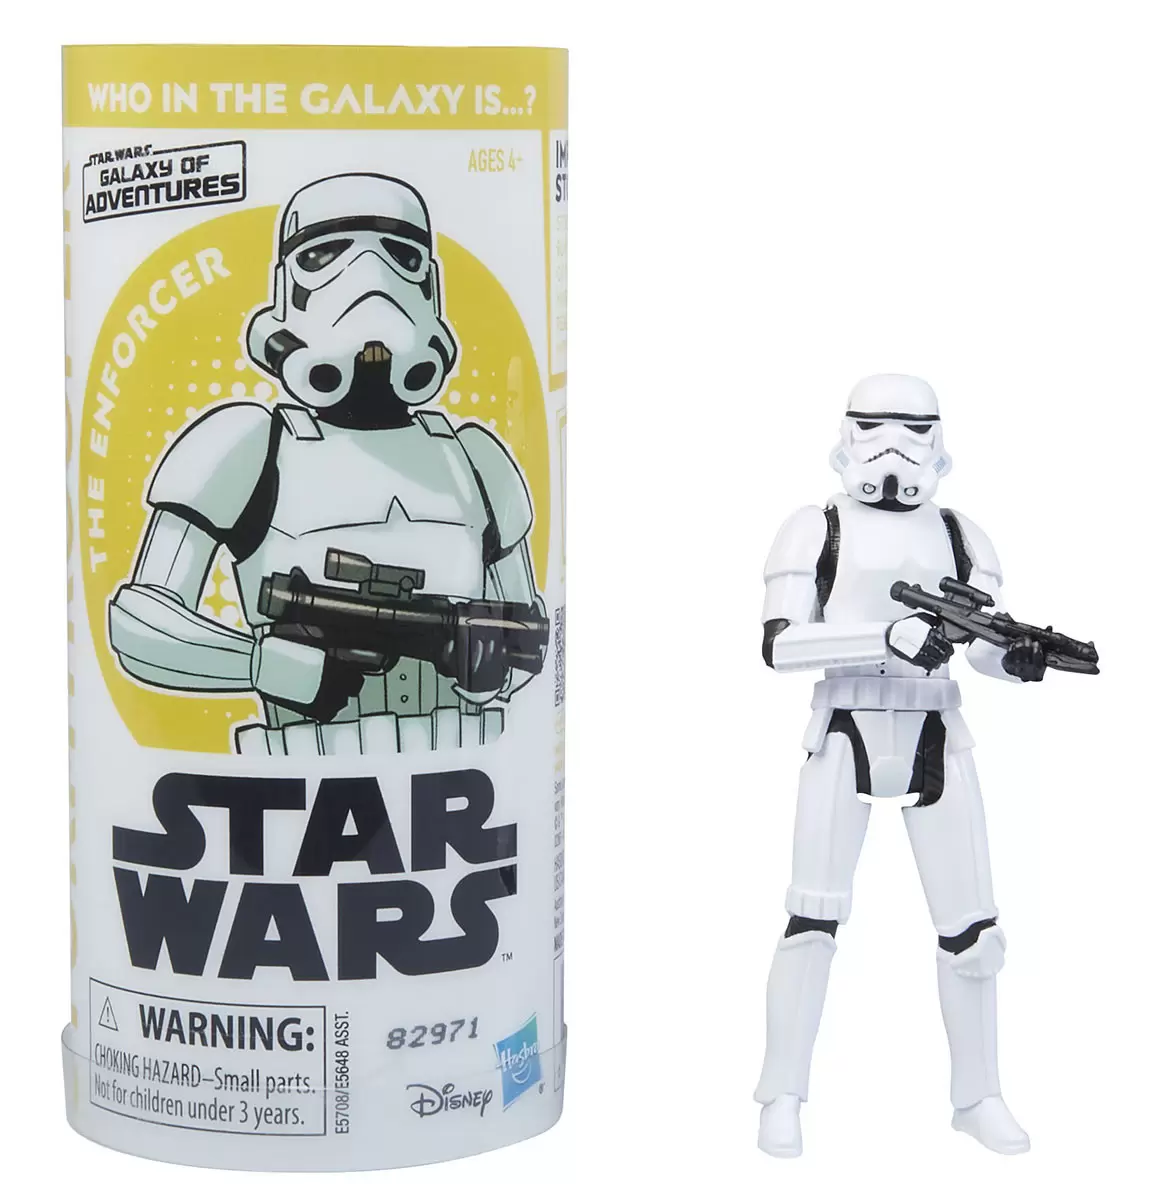 Galaxy of Adventures - Stormtrooper - The Enforcer